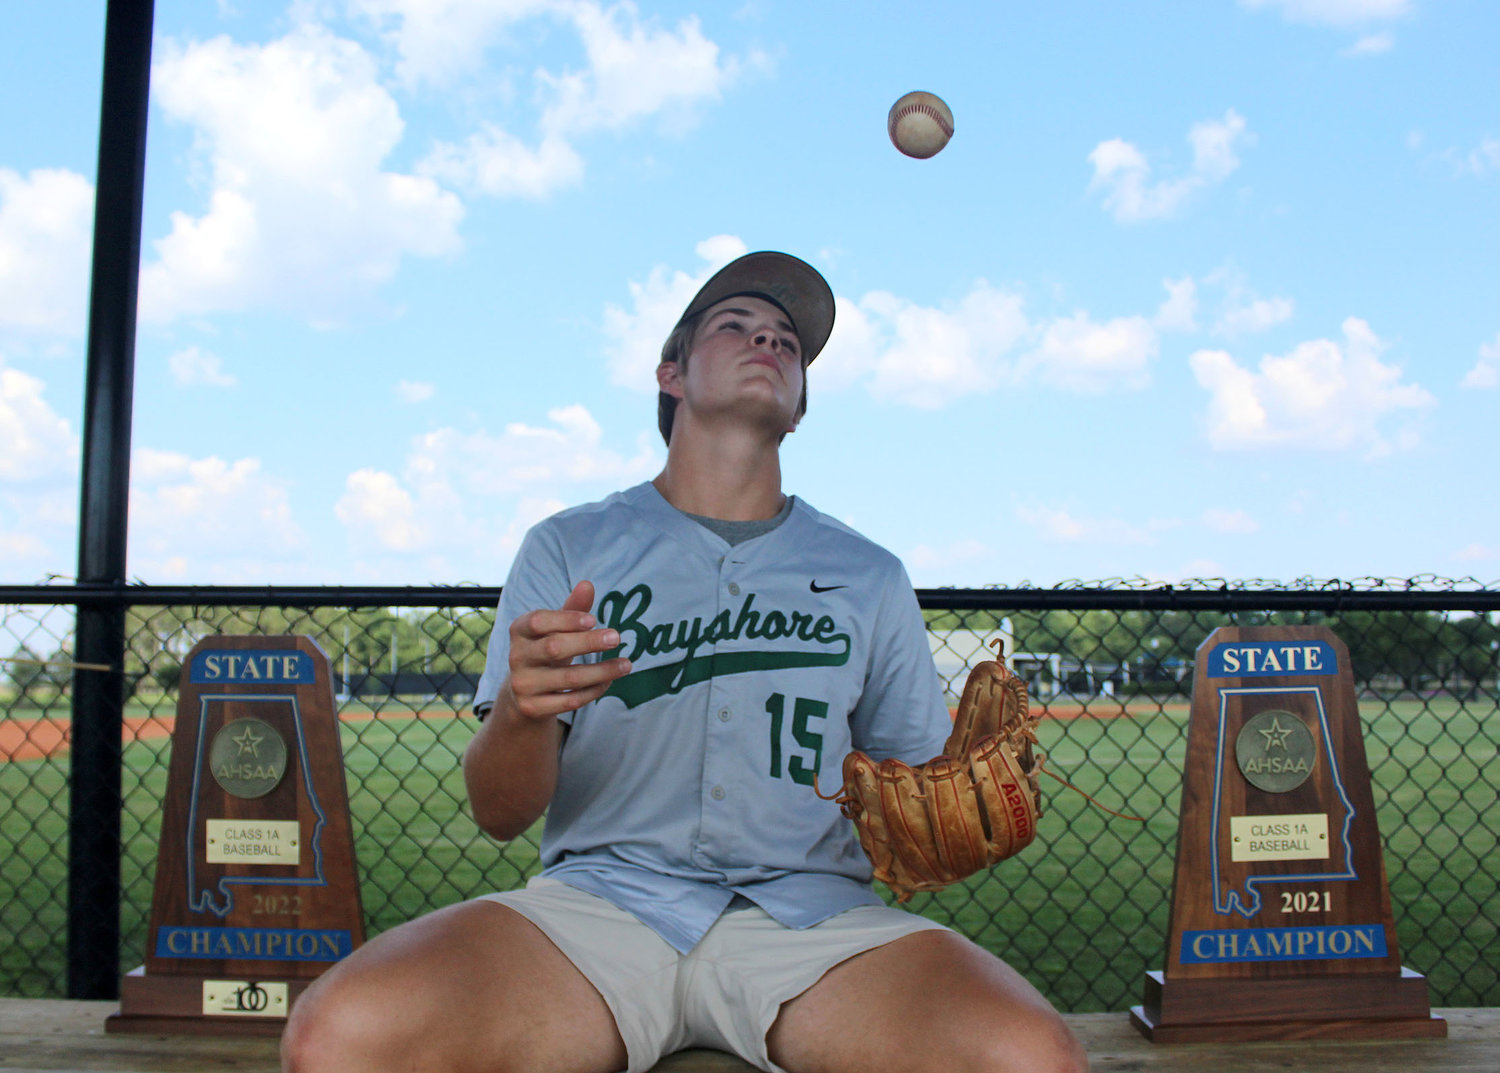 Entering his senior year for the Bayshore Christian Eagles, two-time player of the year John Malone said, “I want to not take anything for granted and just have fun and enjoy baseball for the kid's sport it is.”